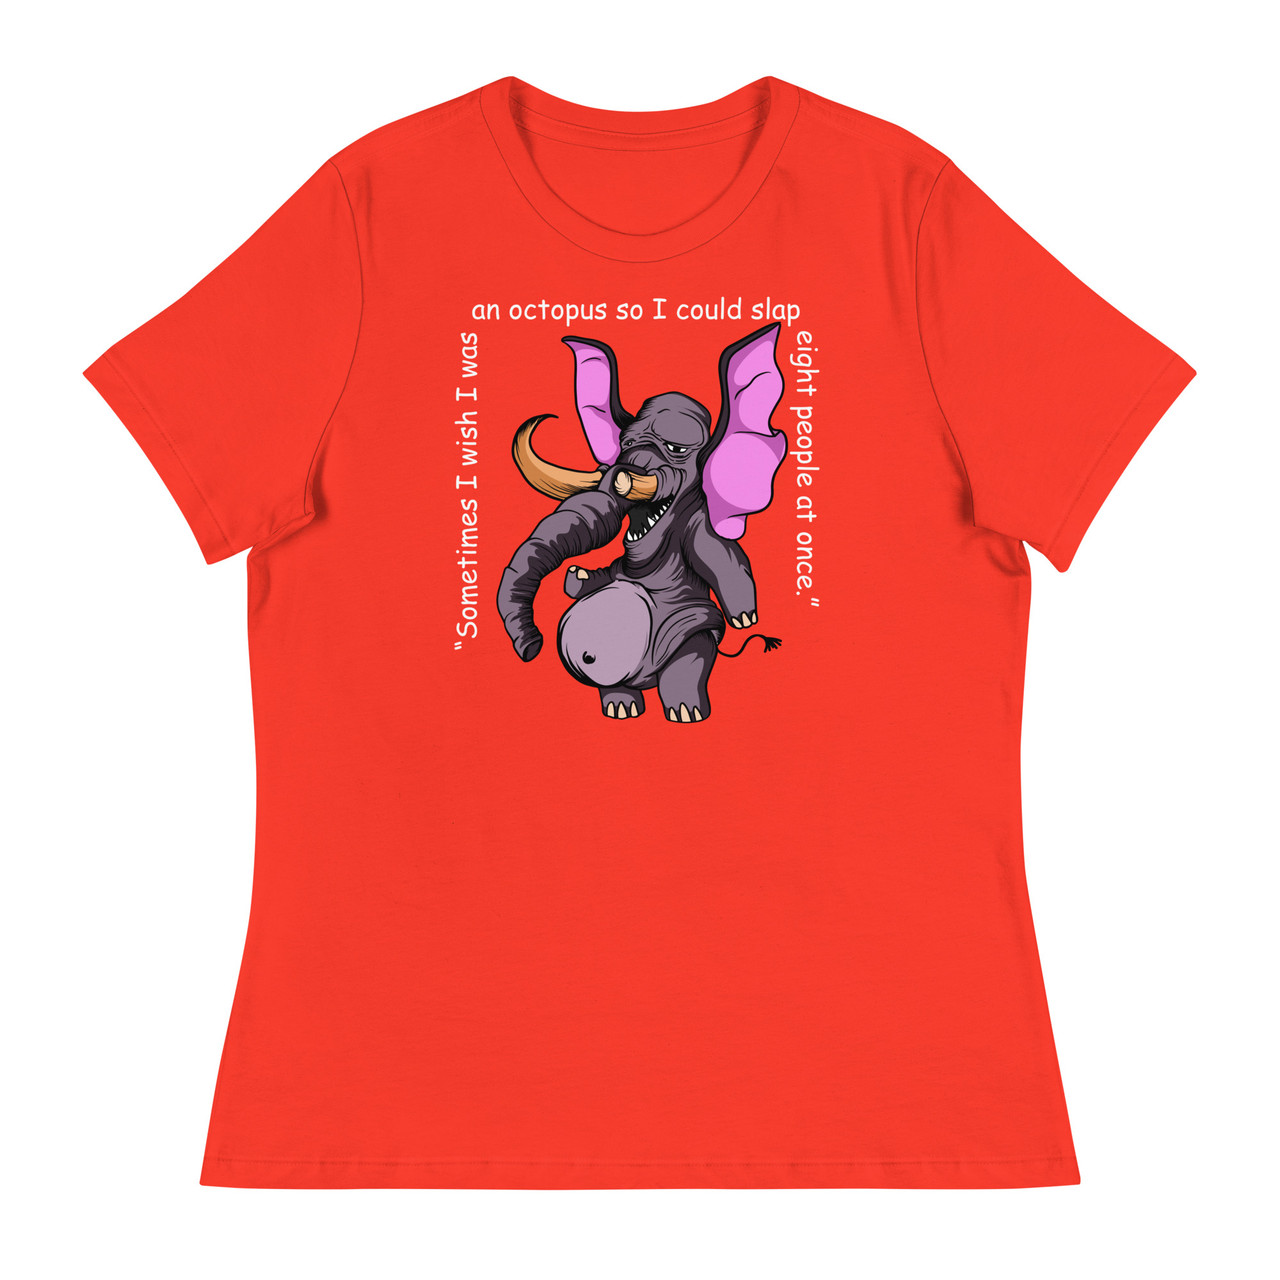 Sometimes I wish I was an octopus Women's Relaxed T-Shirt - Bella + Canvas 6400 